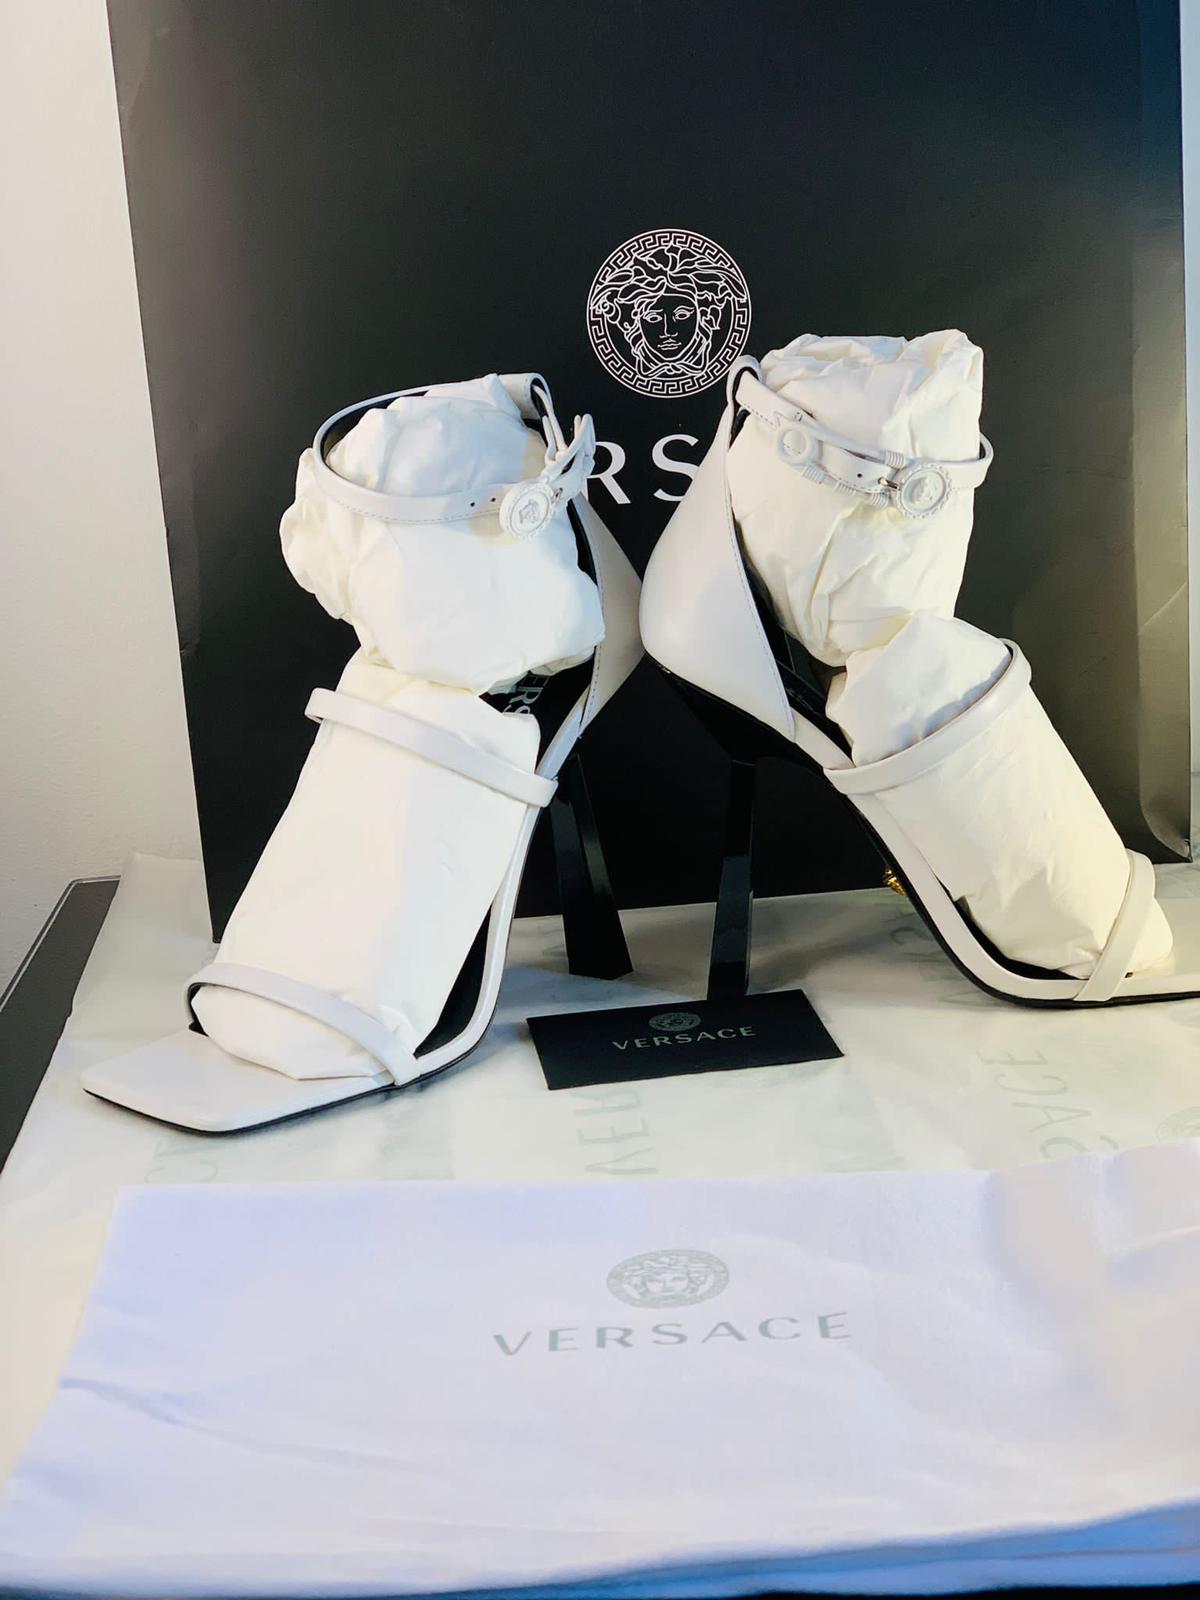 Versace Outlet: Medusa Aevitas satin décolléte with platform with charm -  Black | Versace high heel shoes 1002005DRA67 online at GIGLIO.COM